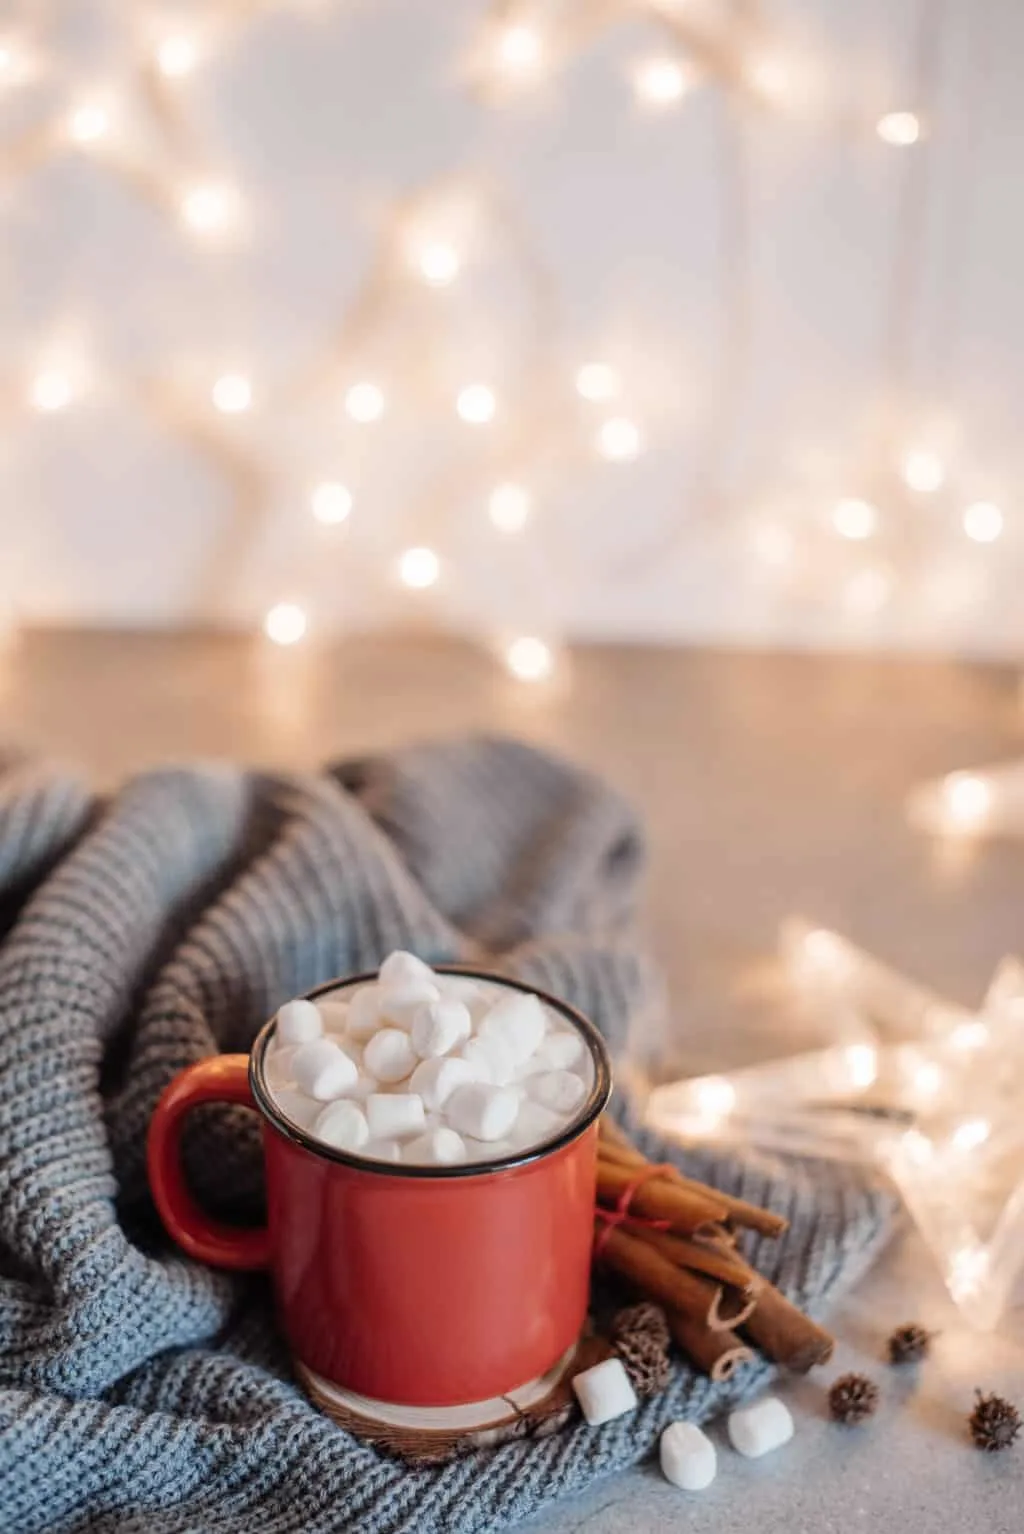 Red mugs with hot chocolate and marshmallows and gingerbread cookies. Christmas concept